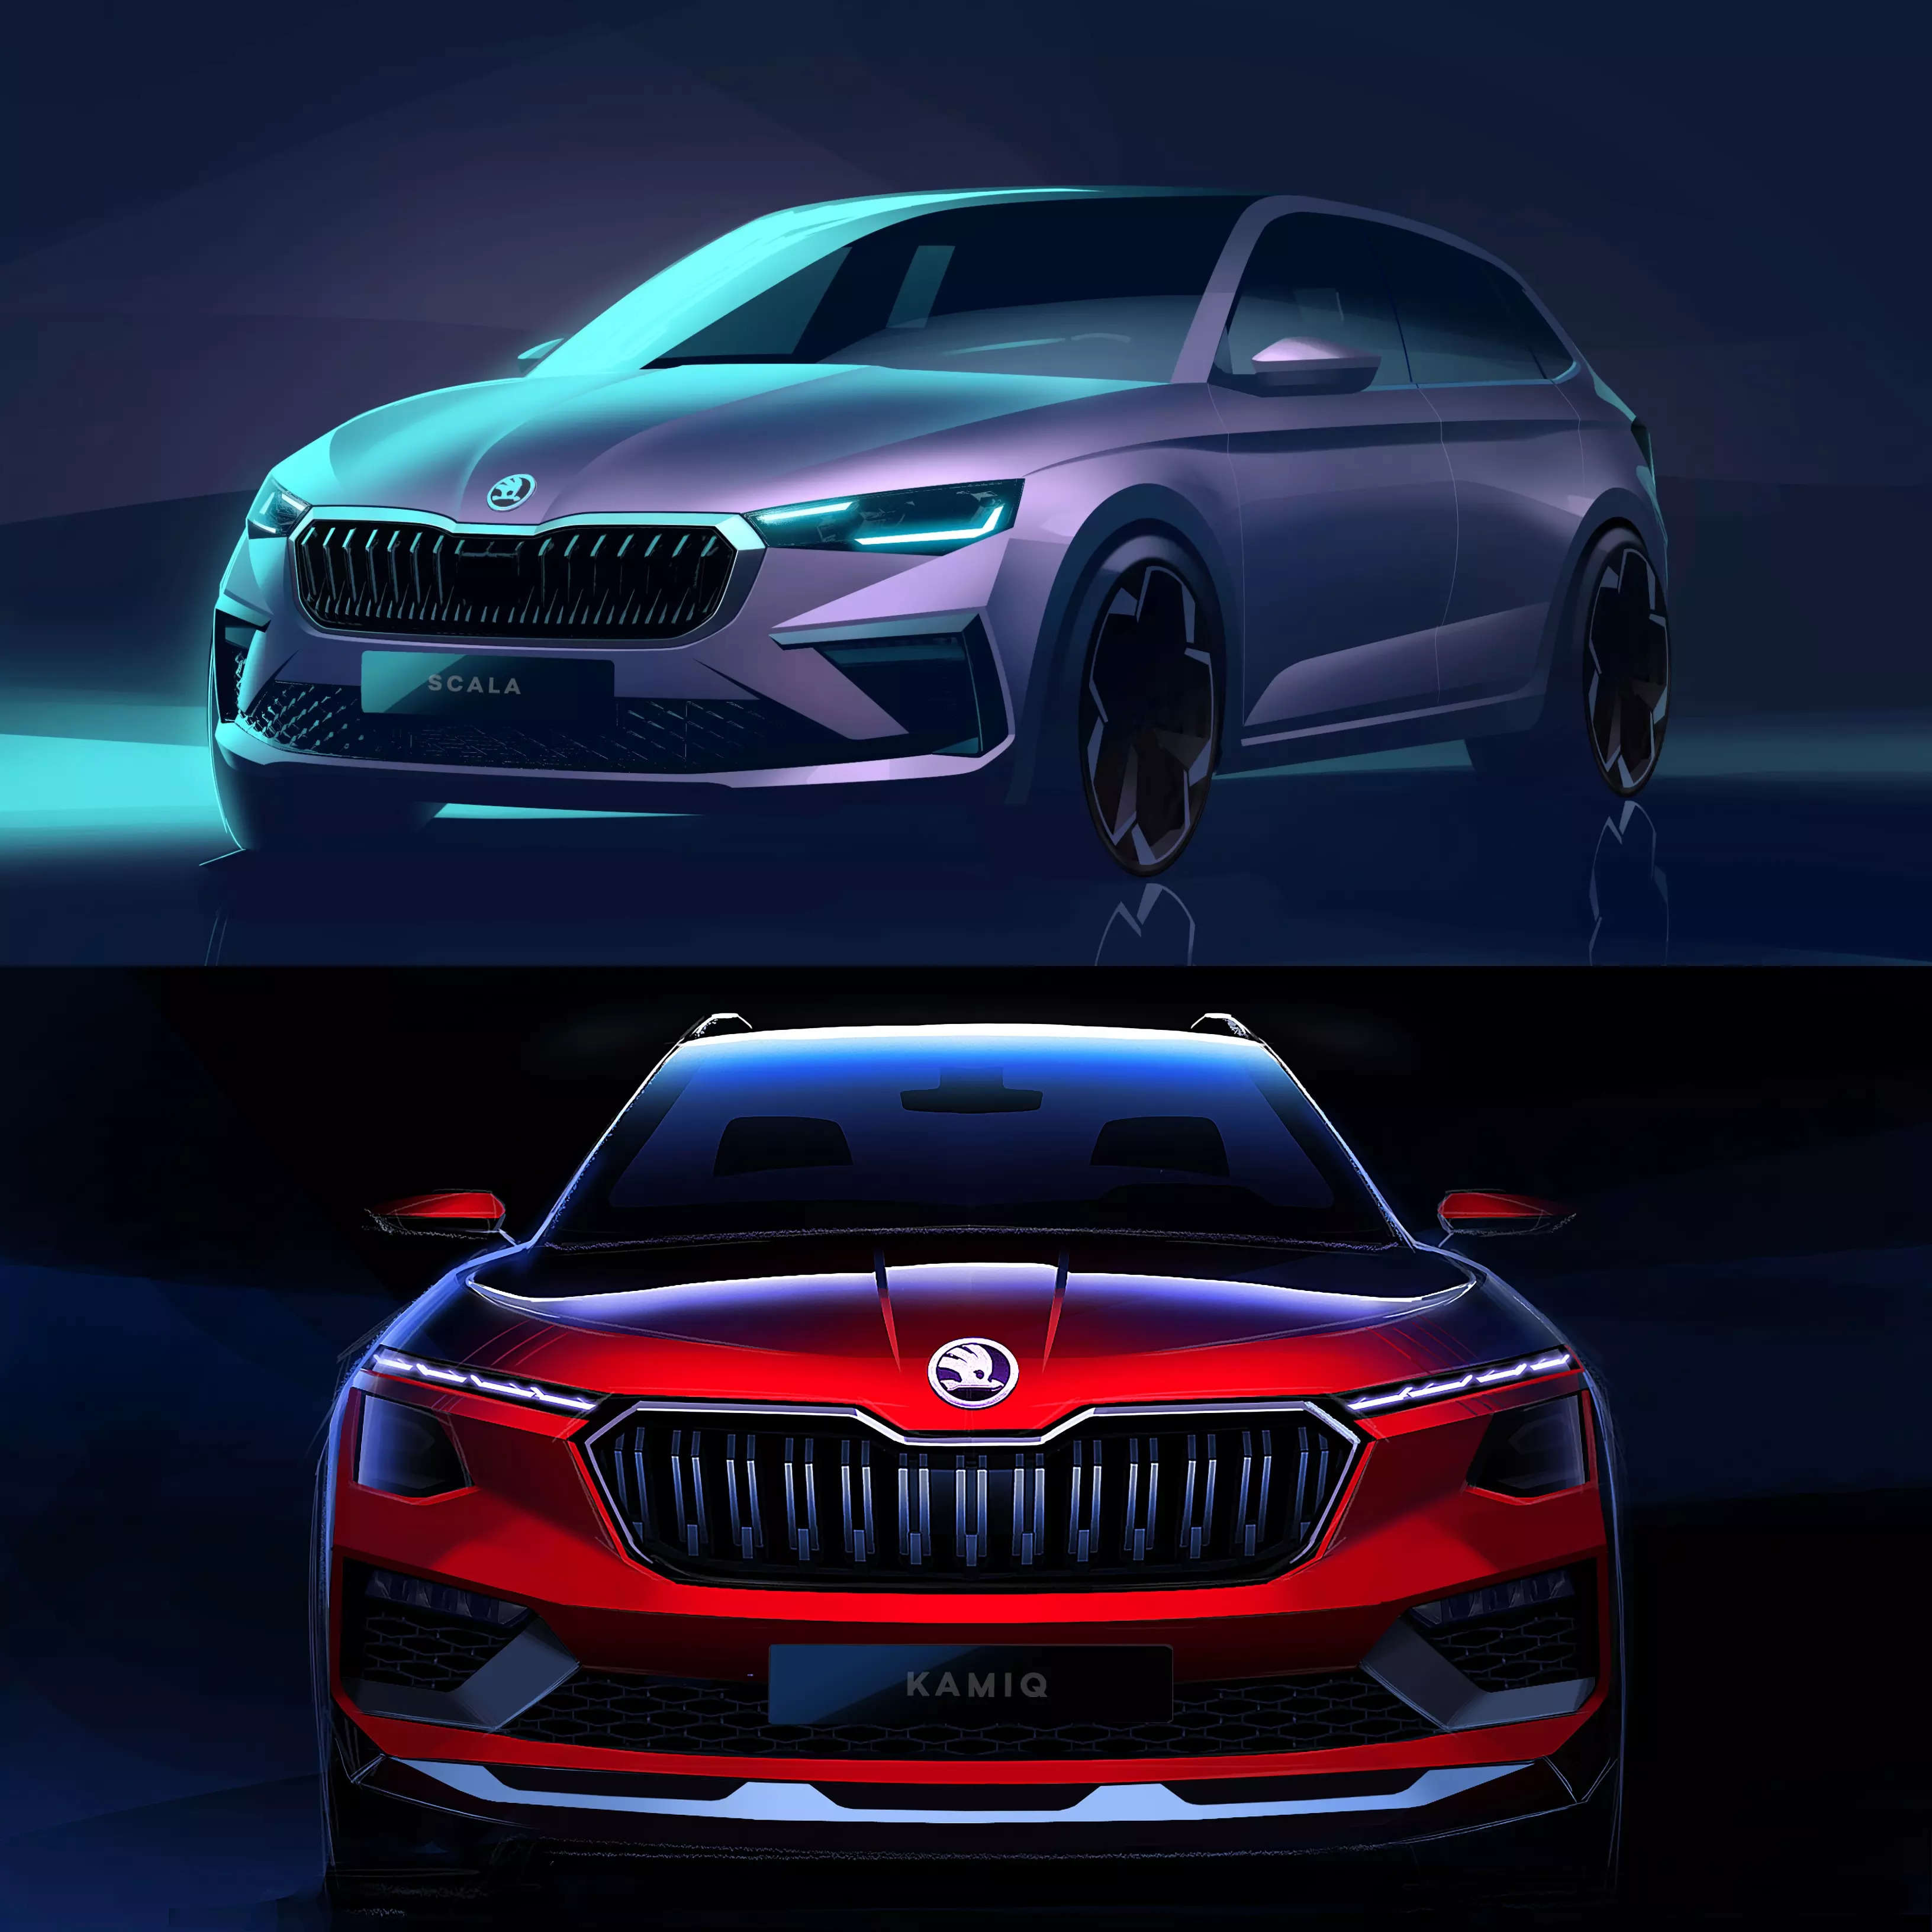 Skoda reveals the first glimpse of the refreshed Scala and Kamiq